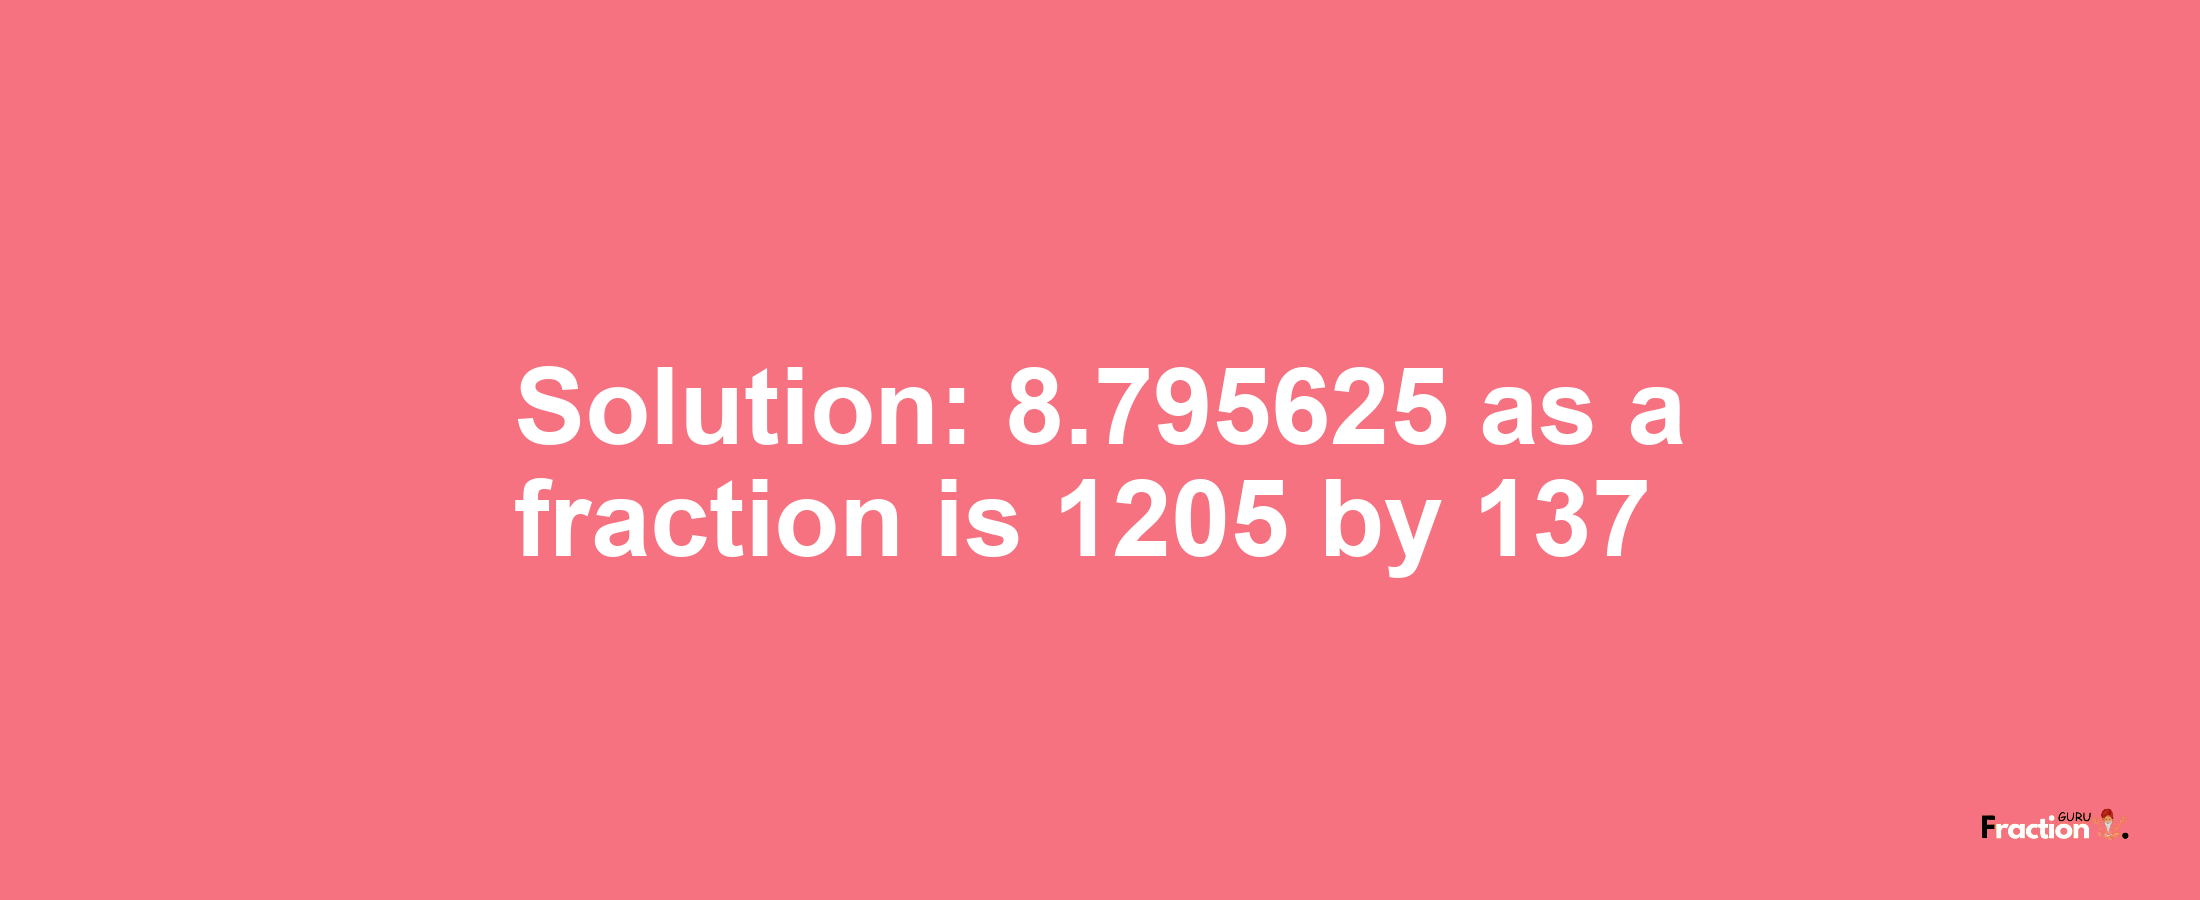 Solution:8.795625 as a fraction is 1205/137